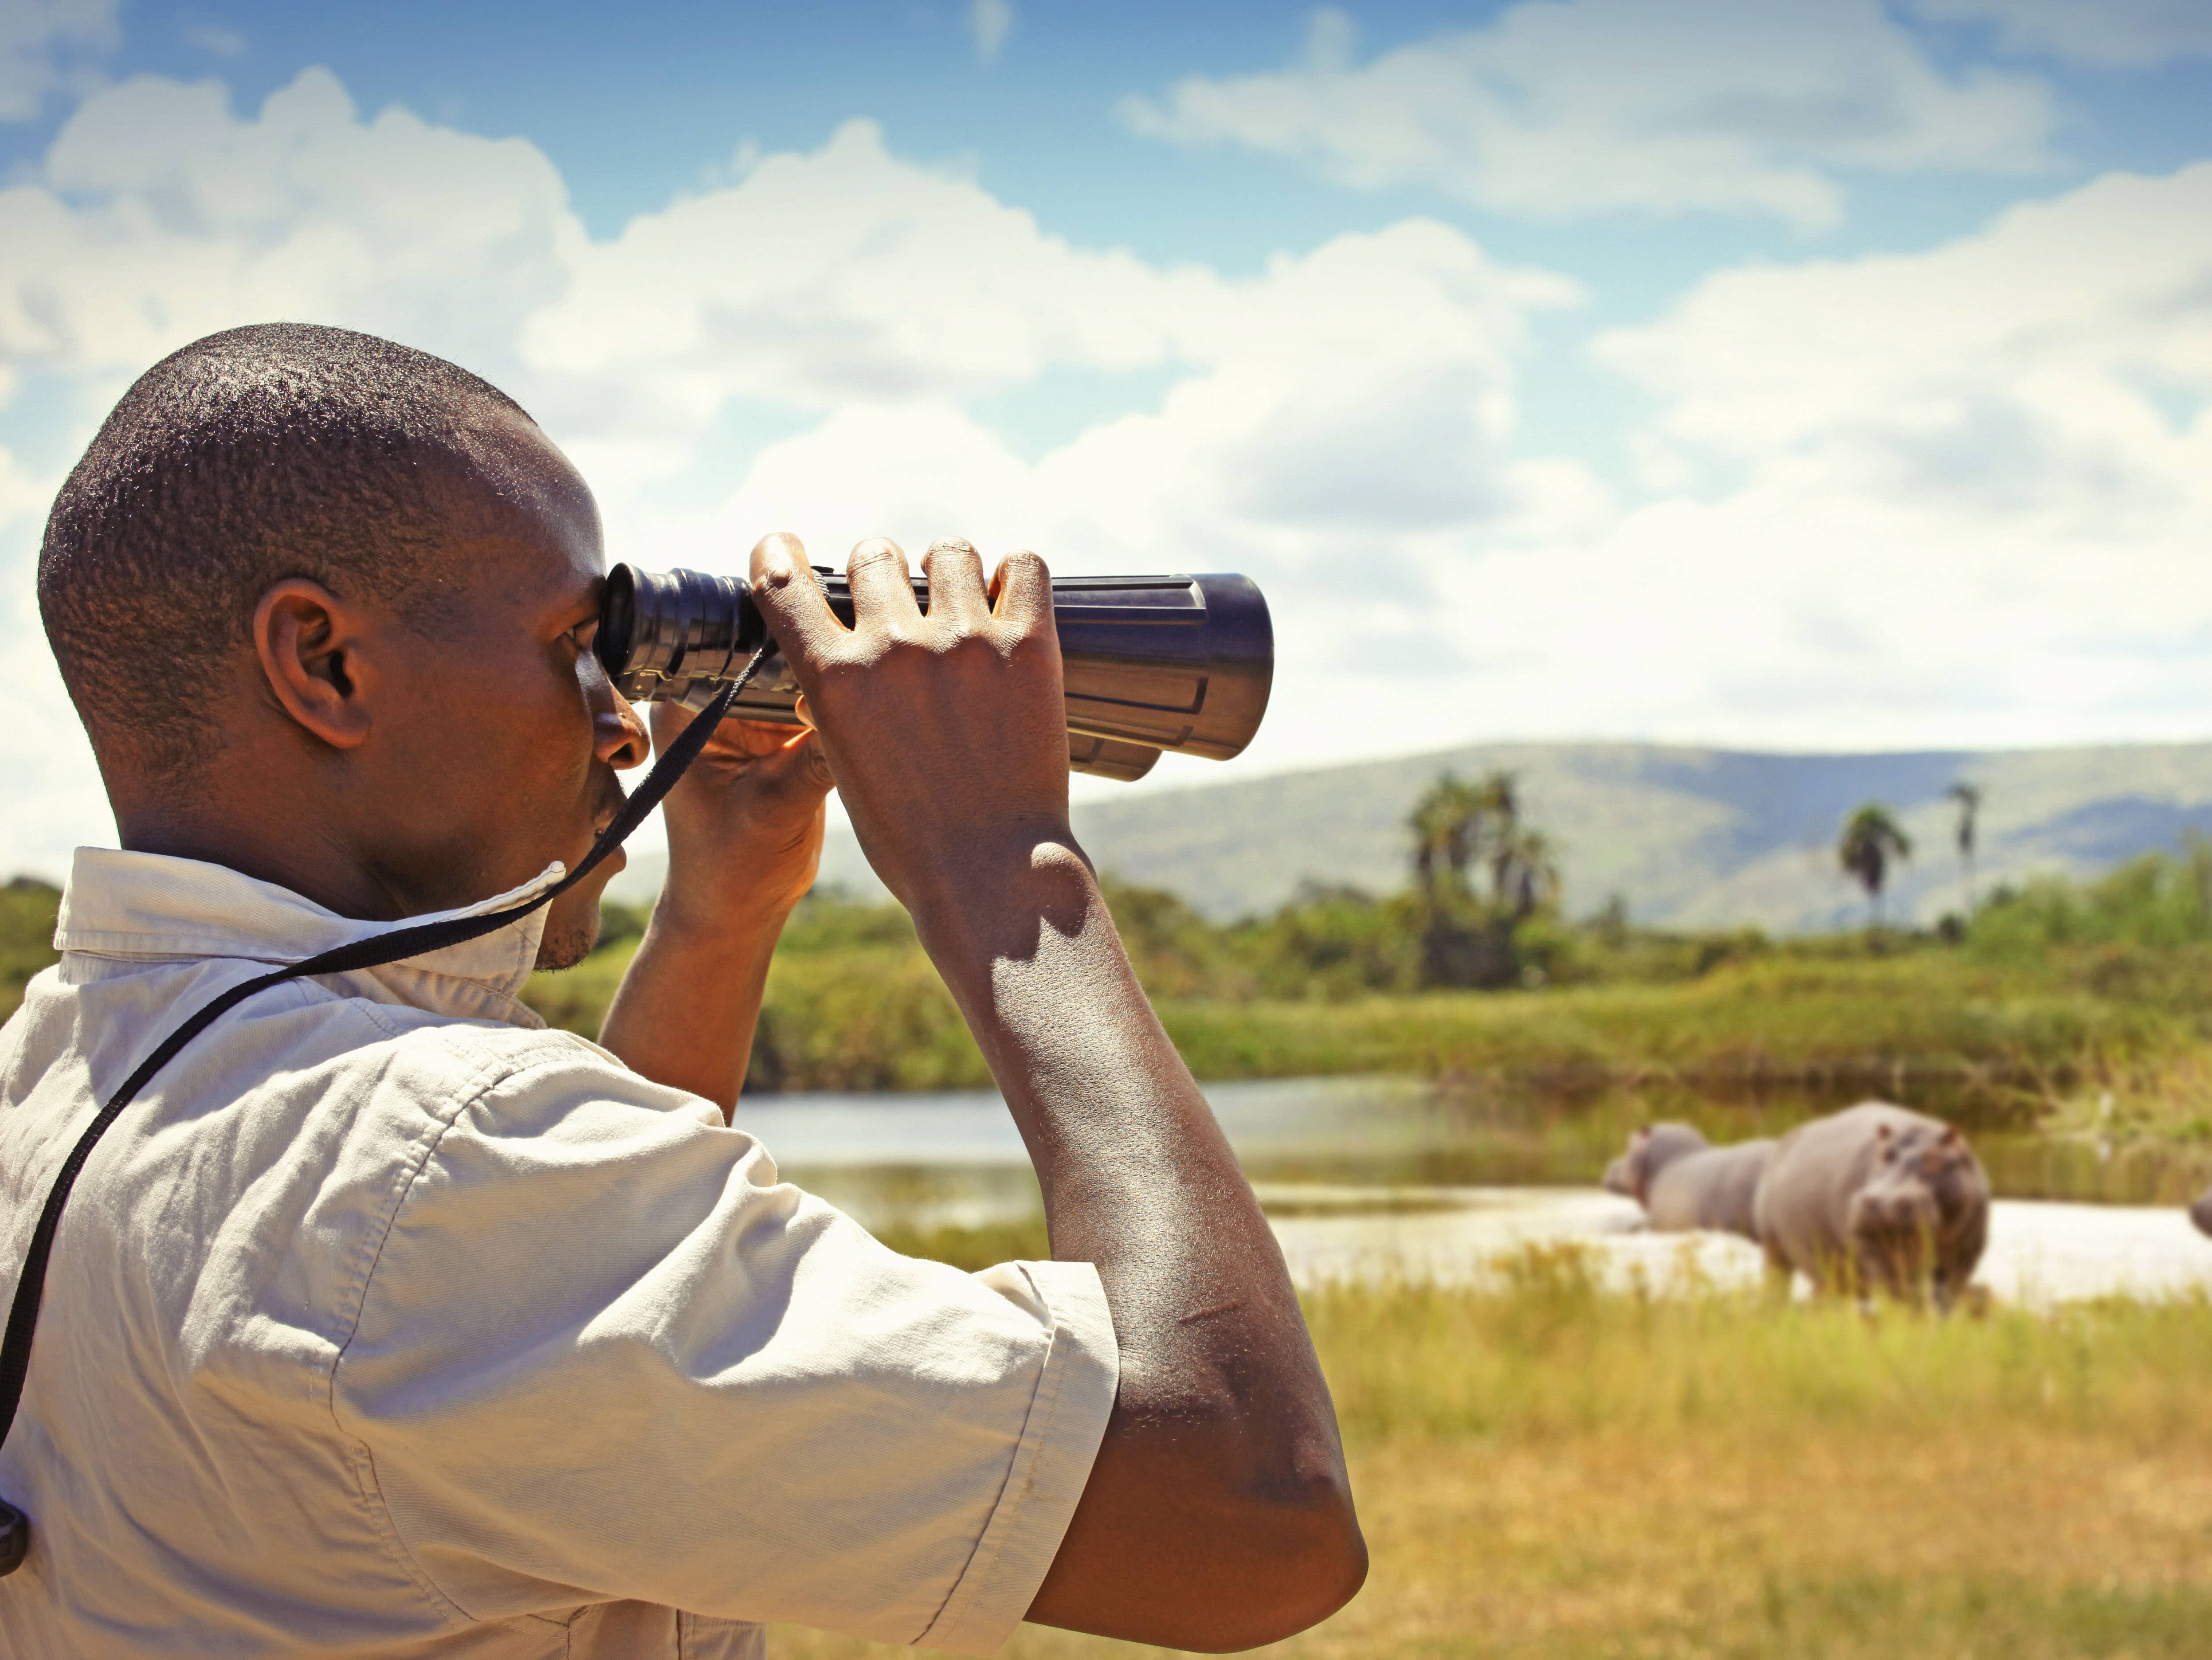  OPT FOR A CLASSIC SAFARI EXPERIENCE  